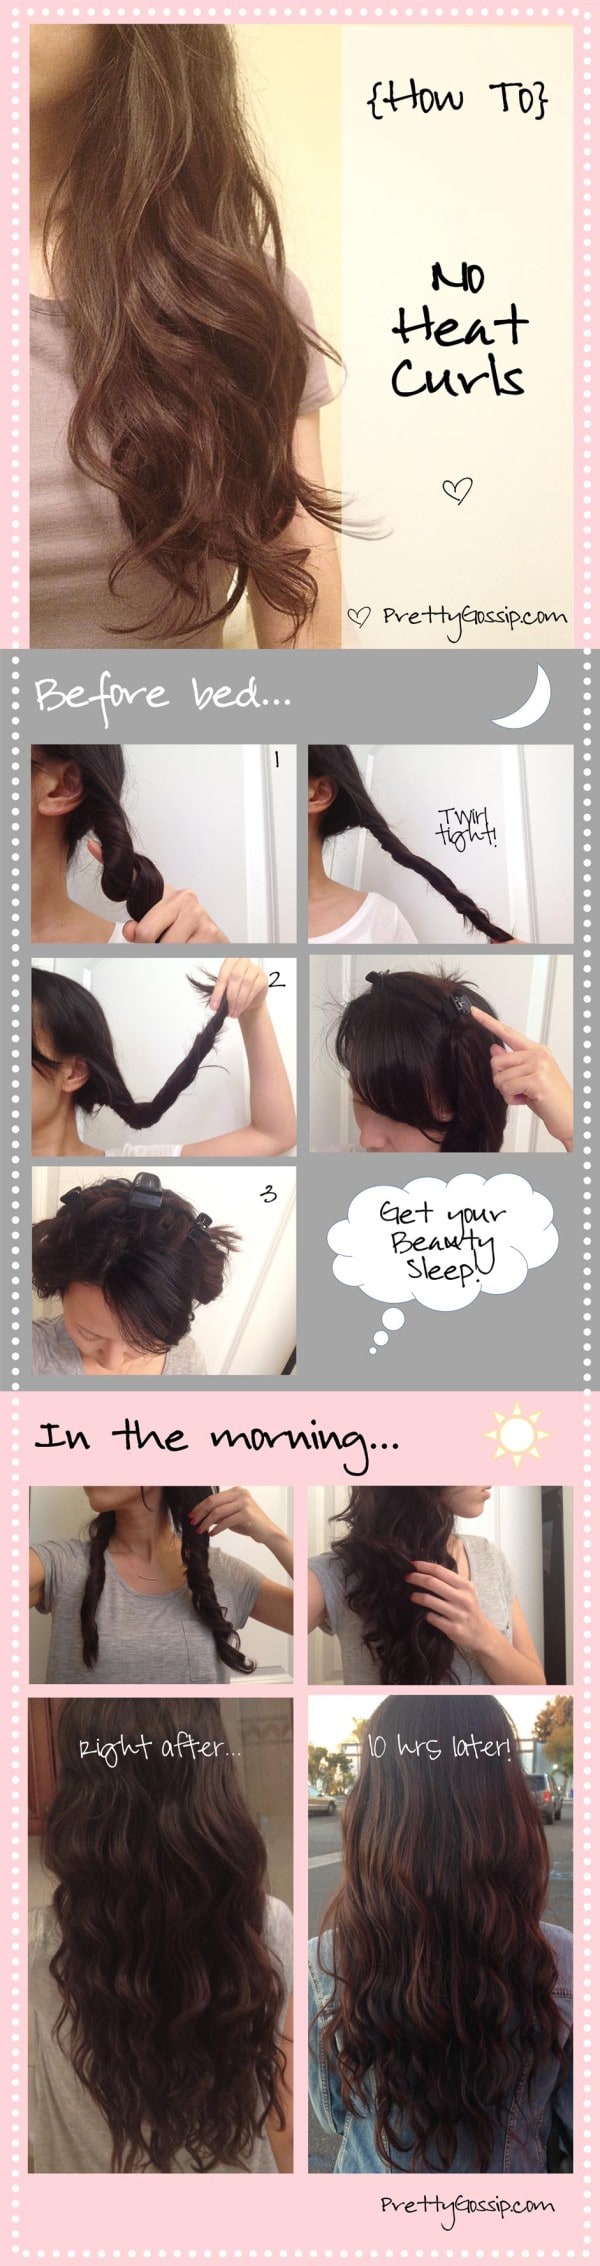 13 Easy and Surprisingly Useful Hairstyle Tips That Will Keep Your Hair Shiny